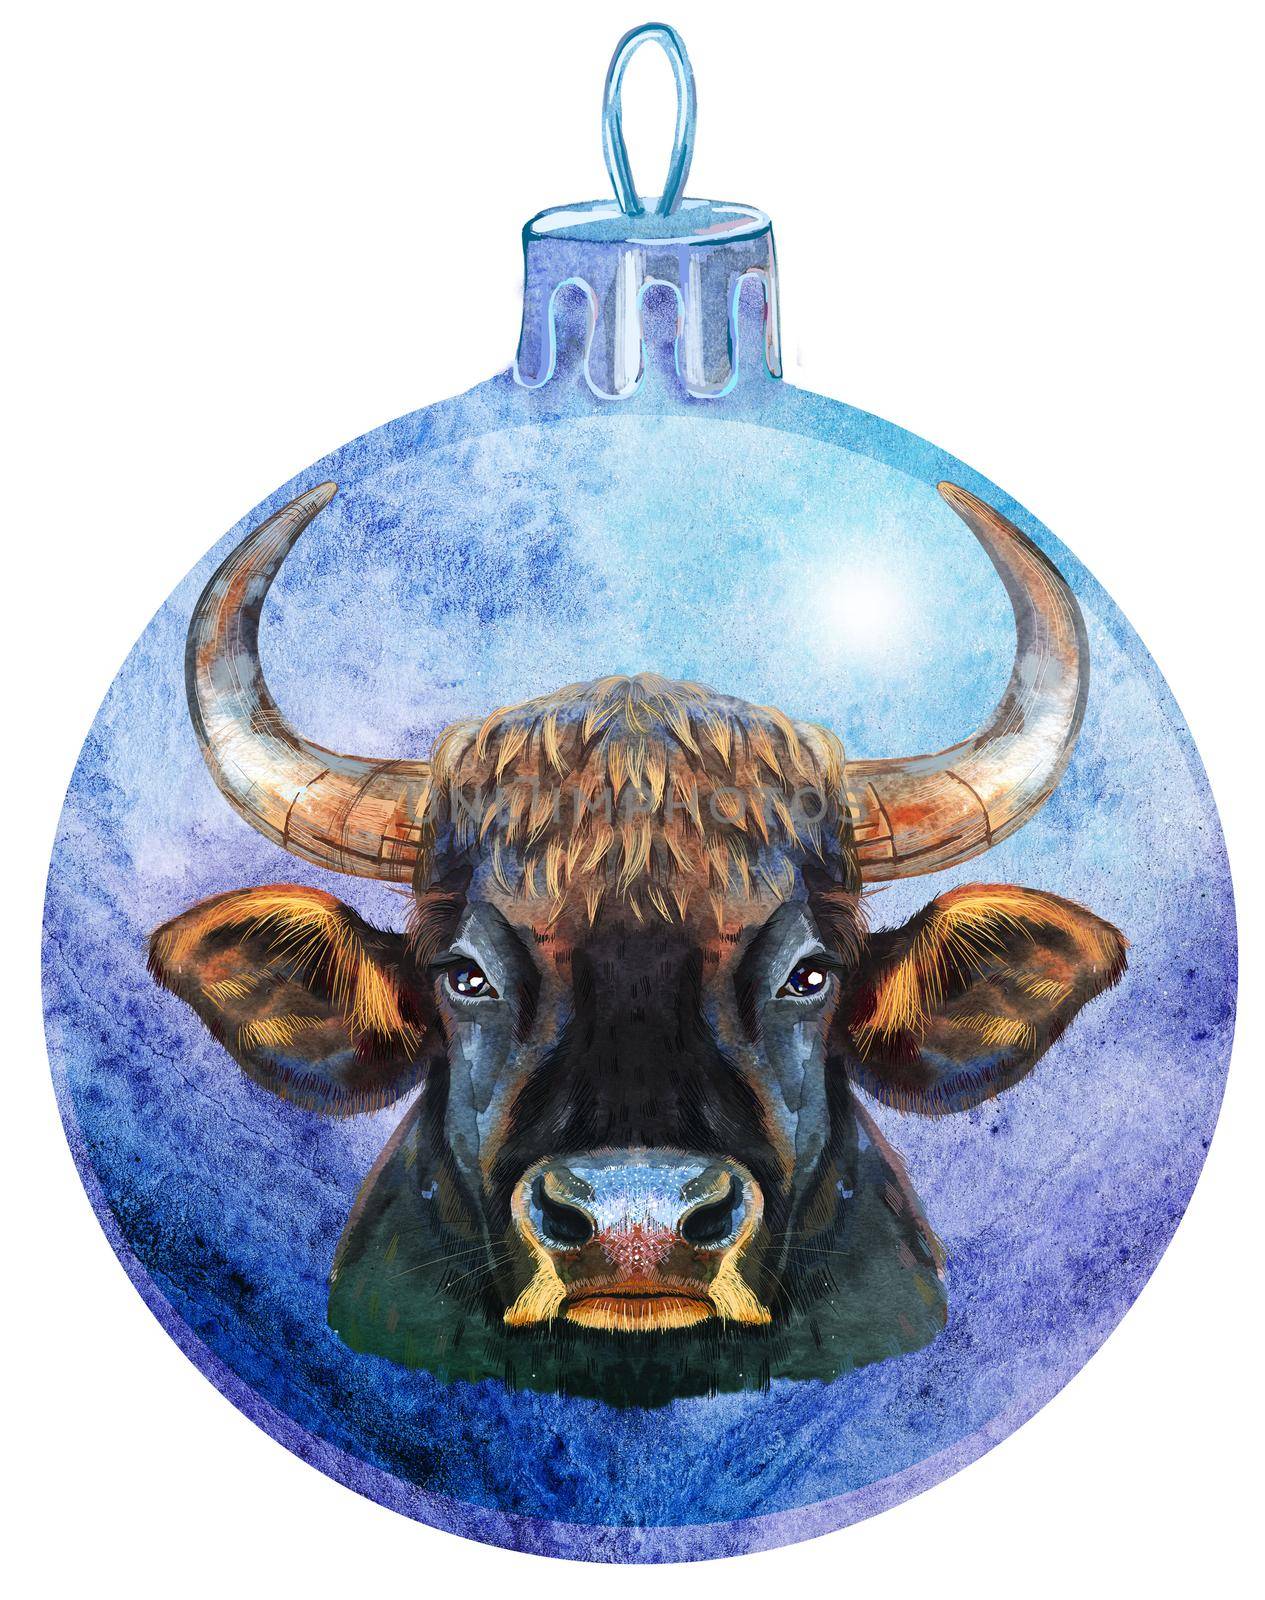 Watercolor Christmas violet ball with bull isolated on a white background.